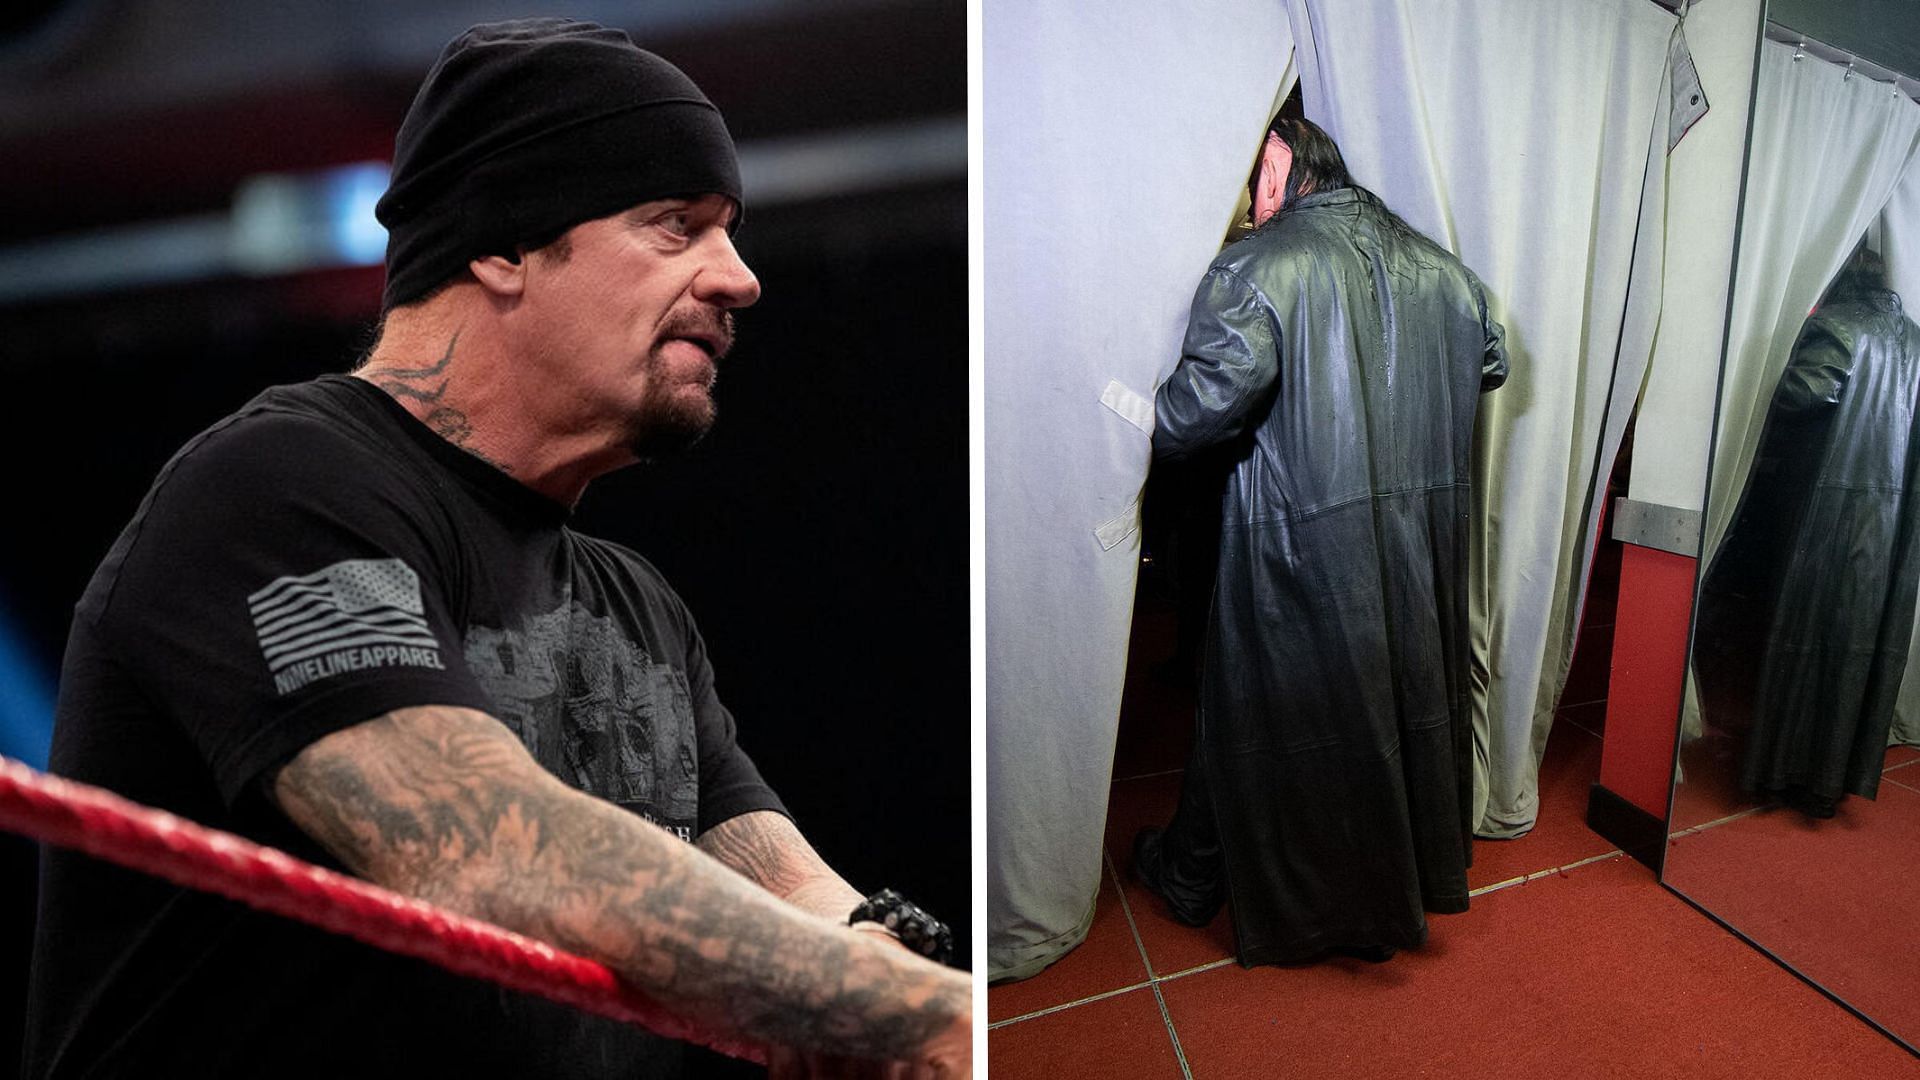 The Undertaker was inducted into the 2022 WWE Hall of Fame